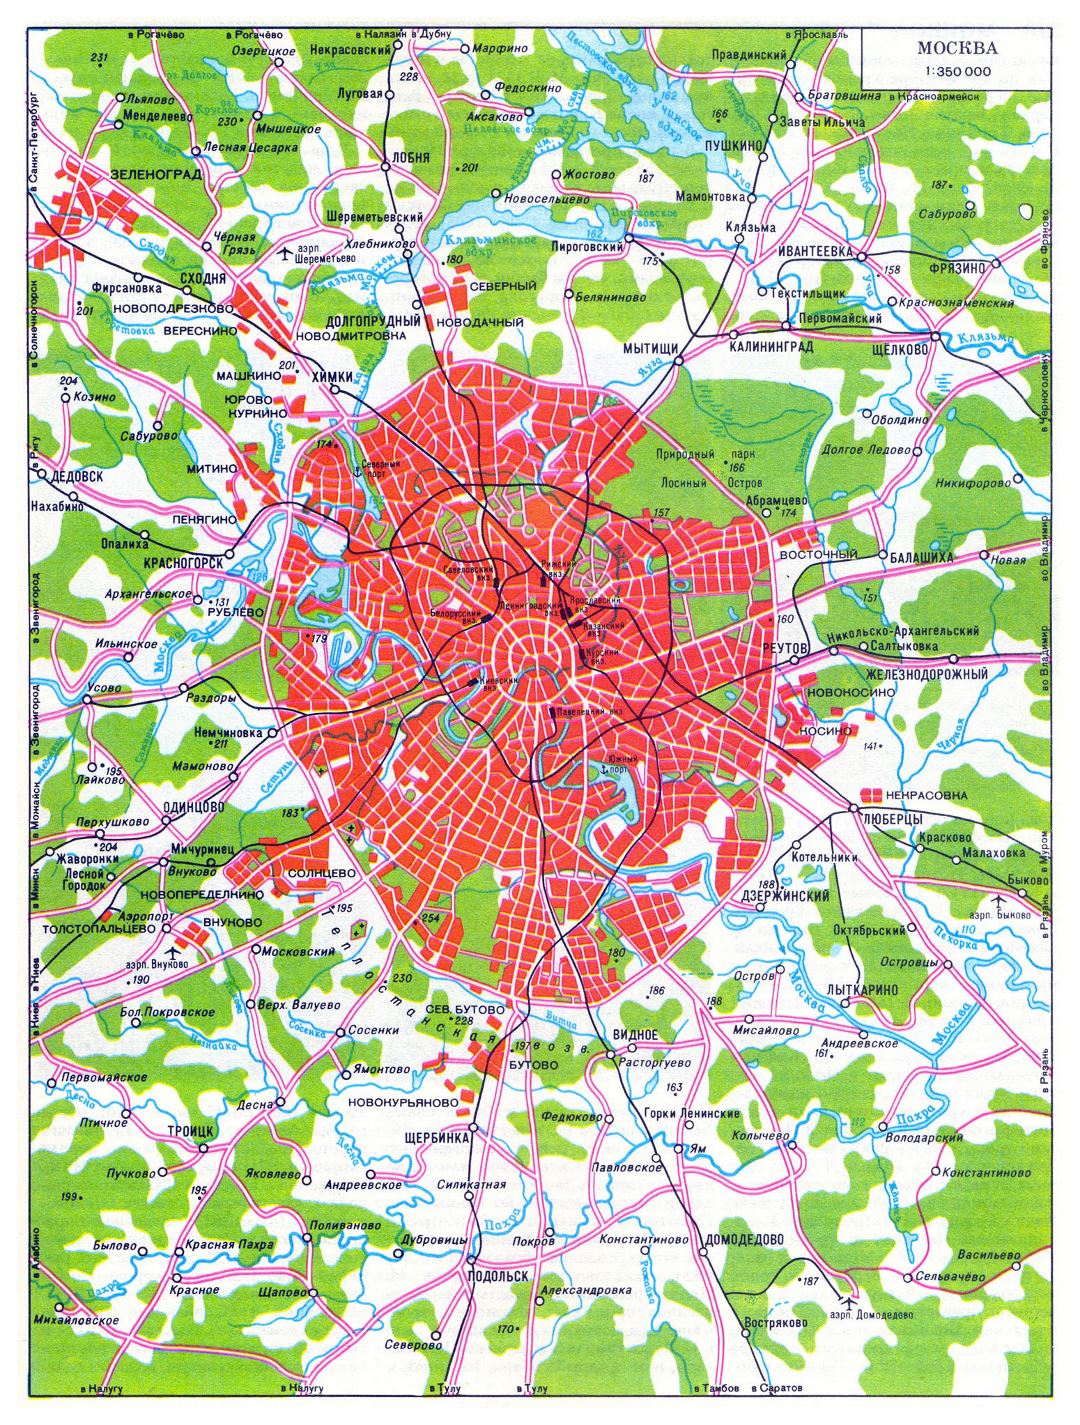 Large transit map of Moscow city in russian